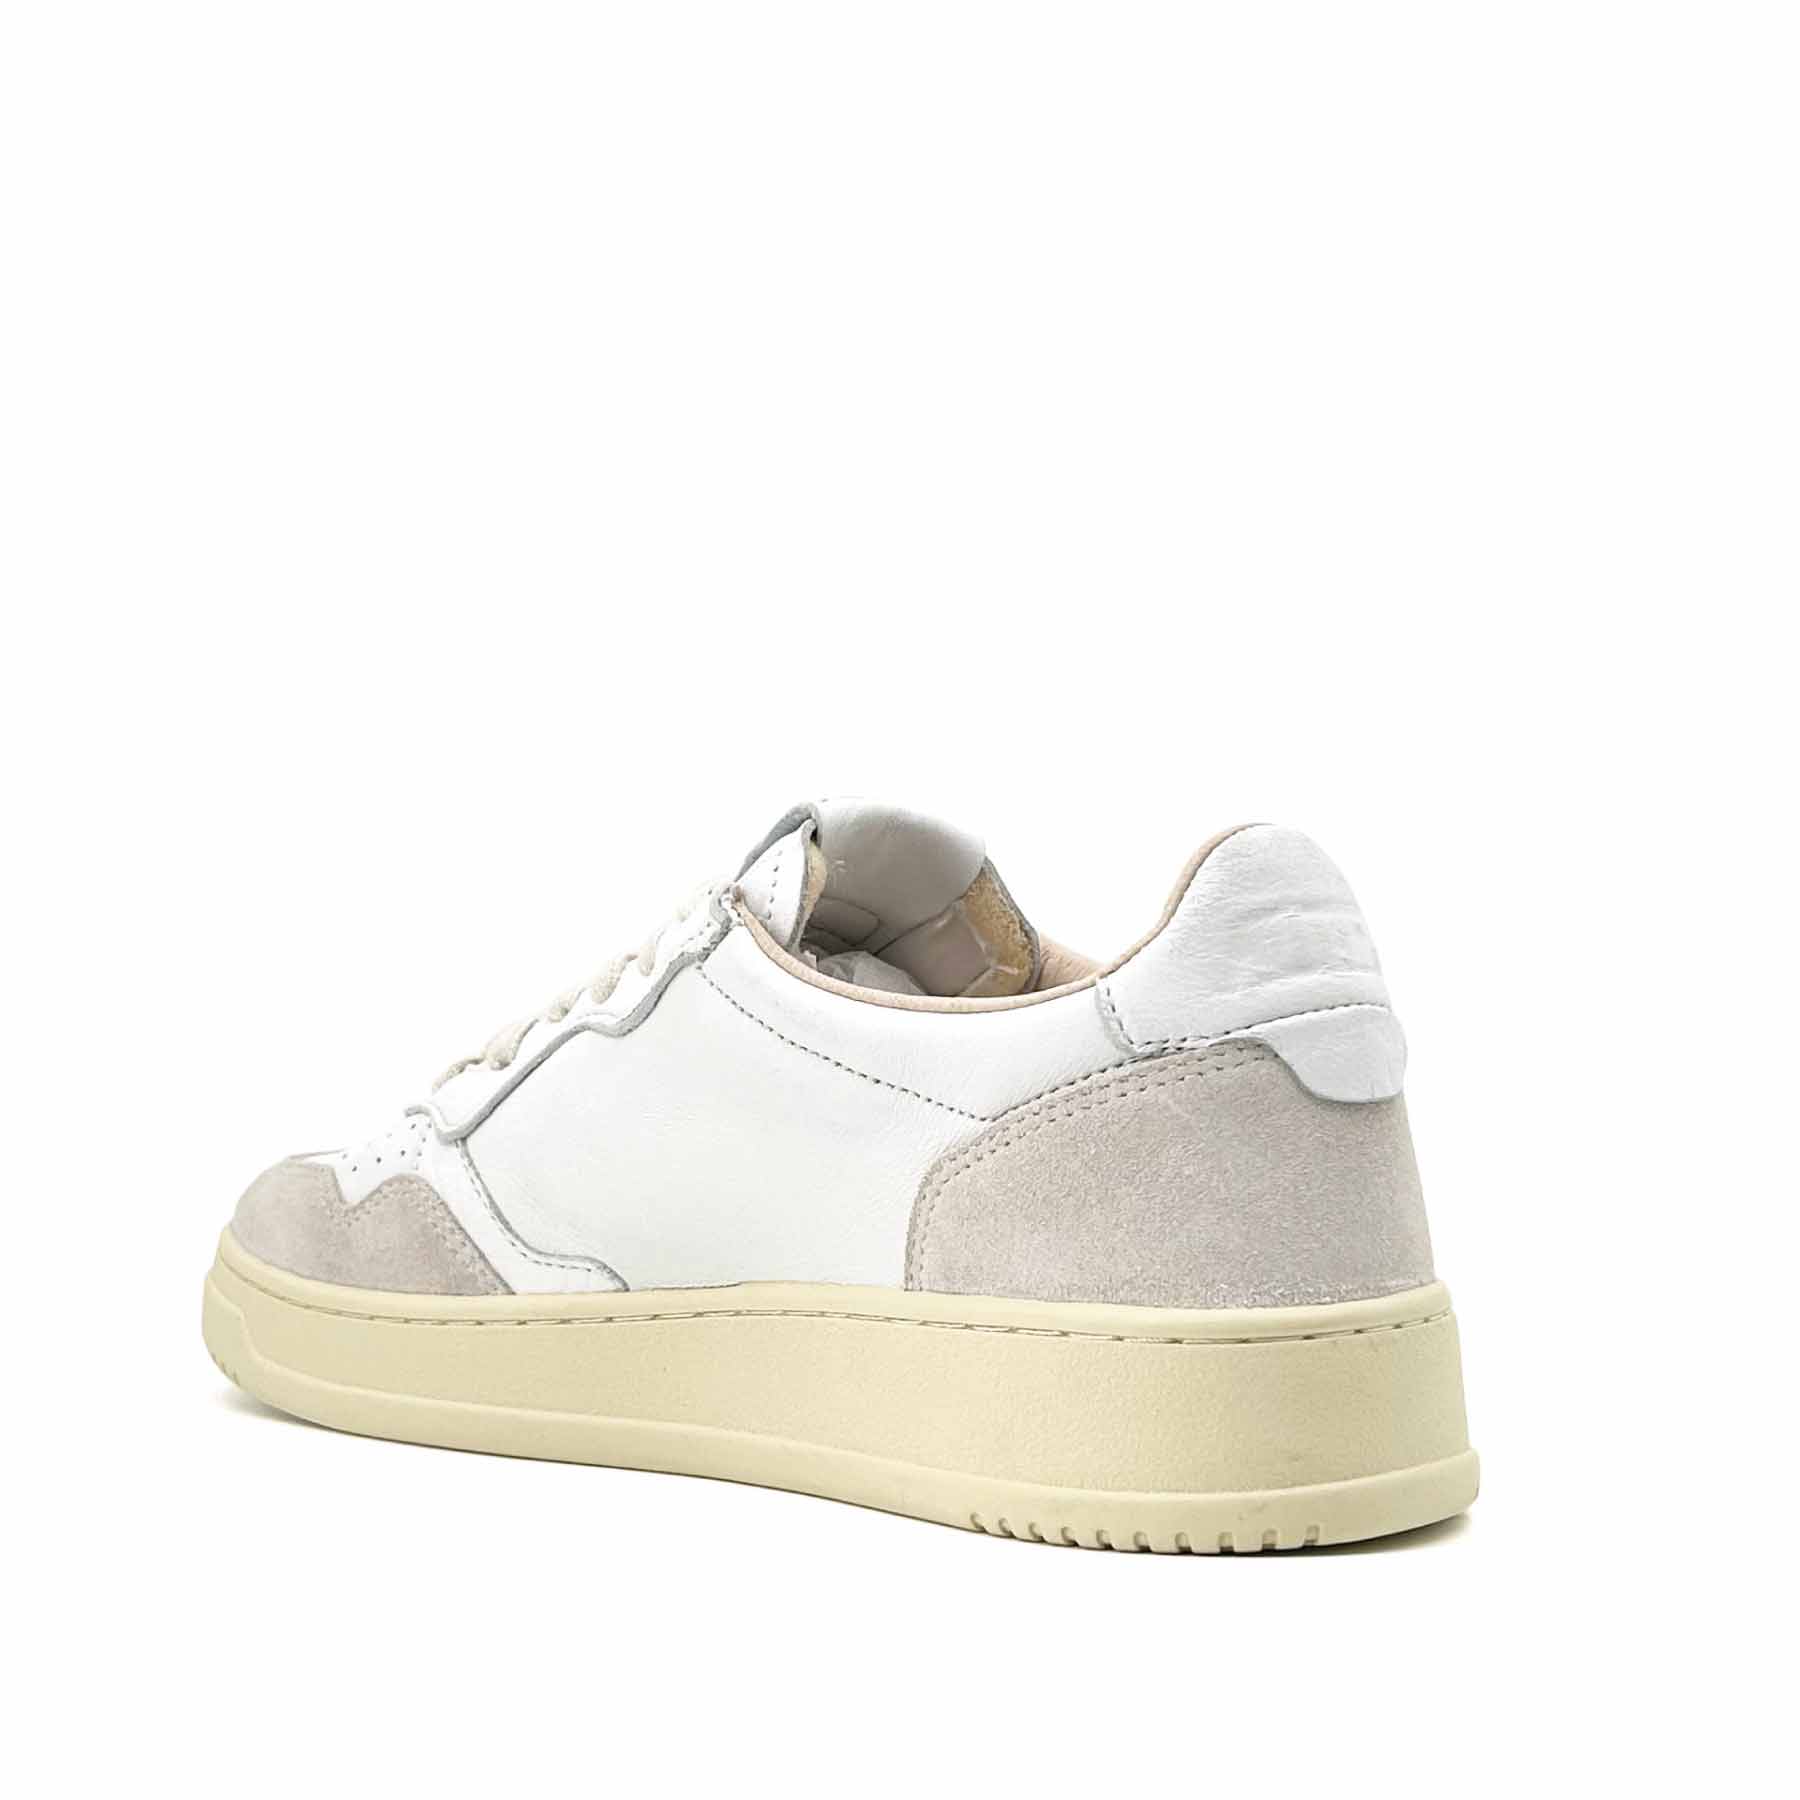 Medalist Low Man White Goat Leather White Suede